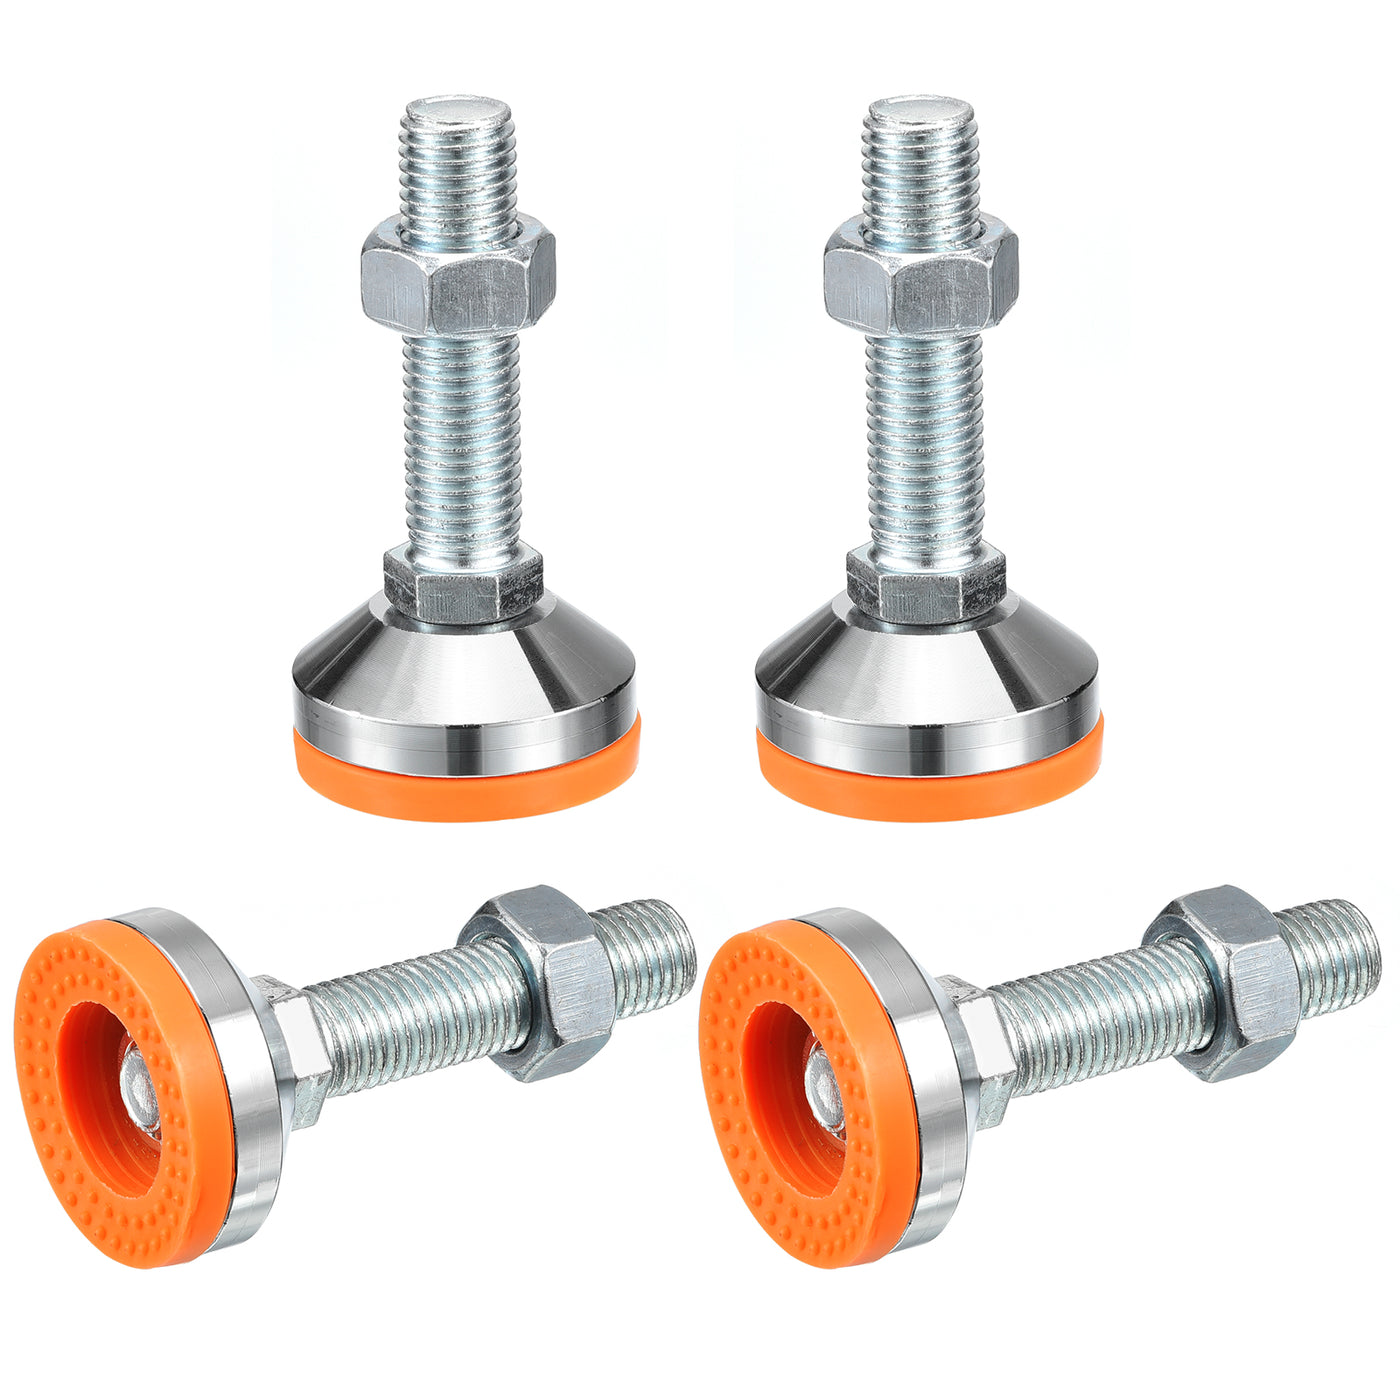 uxcell Uxcell Leveling Feet, 4Pcs M20x80x60mm - Carbon Steel Non-Skid Anti-shock Adjustable Table Feet, Leveling Screw Leg for Furniture Workshops Equipment